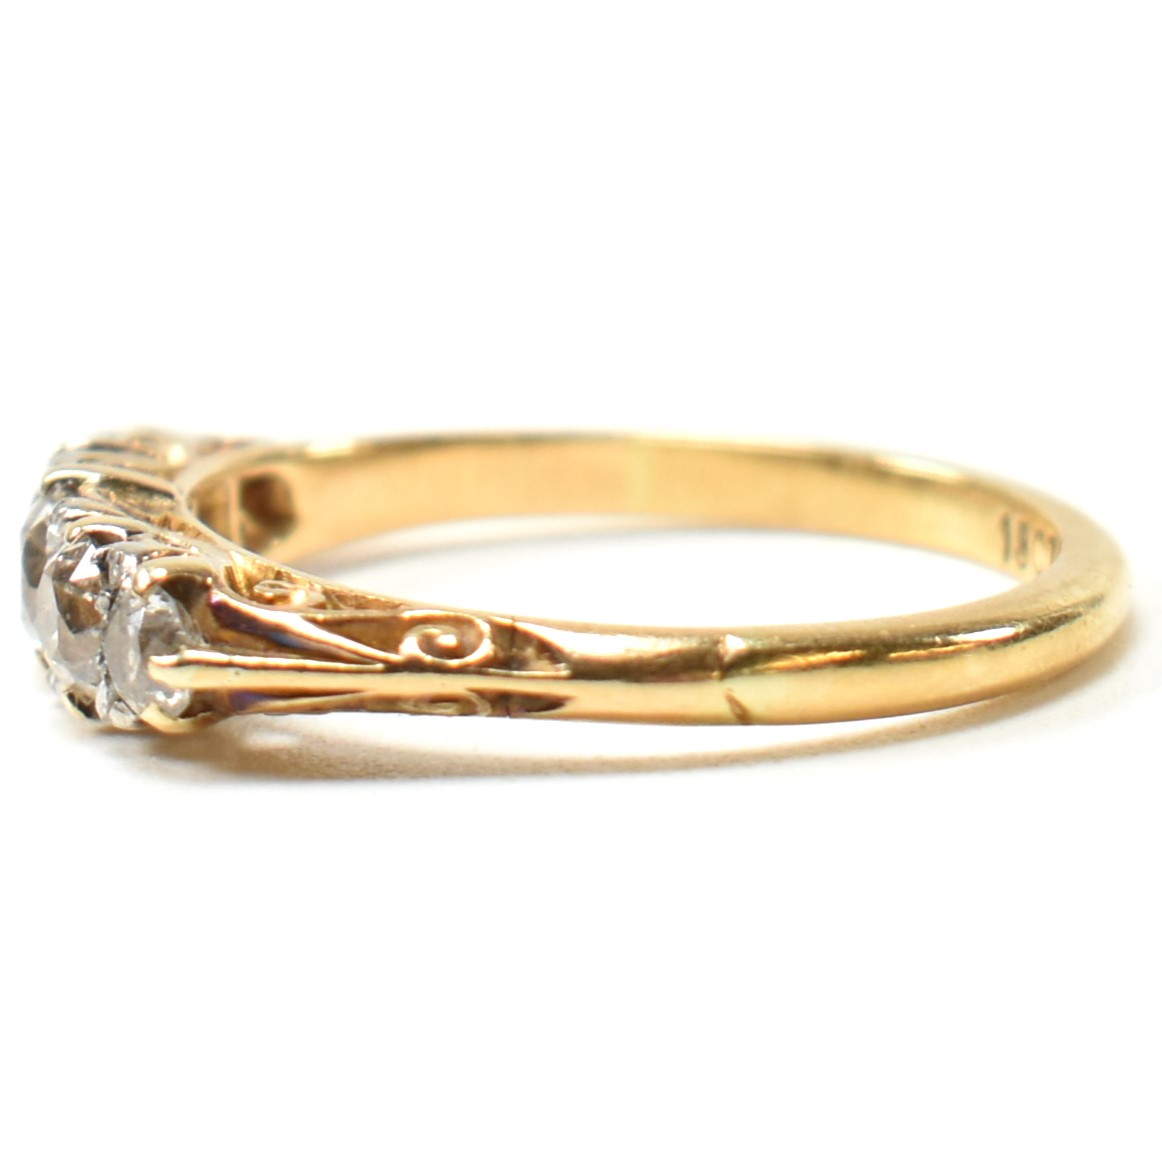 18CT GOLD & DIAMOND FIVE STONE RING - Image 2 of 8